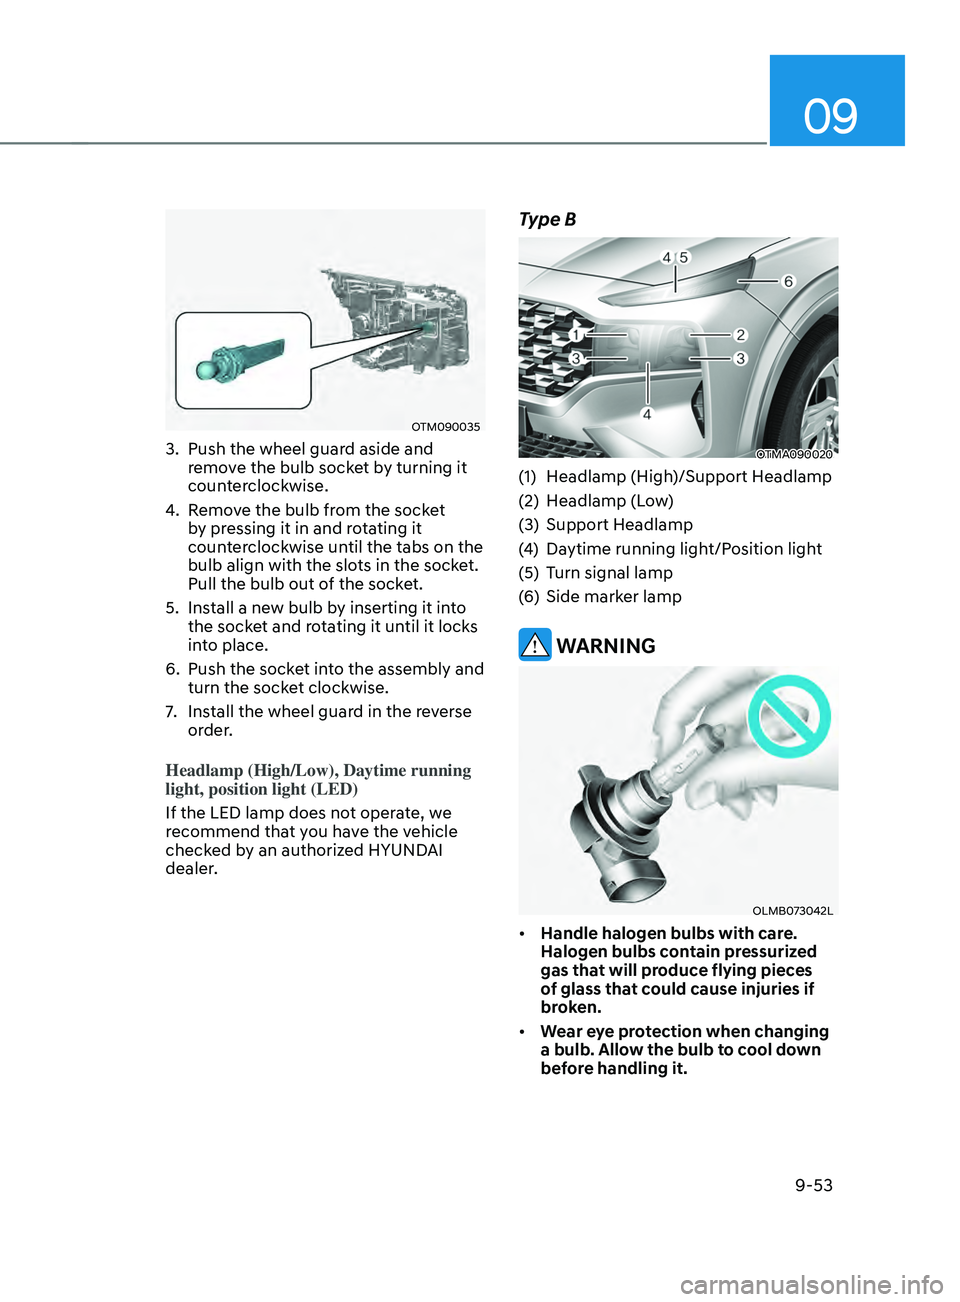 HYUNDAI SANTA FE LIMITED 2021  Owners Manual 09
9-53
OTM090035
3. Push the wheel guard aside and 
remove the bulb socket by turning it 
counterclockwise.
4.
 Remo

ve the bulb from the socket 
by pressing it in and rotating it 
counterclockwise 